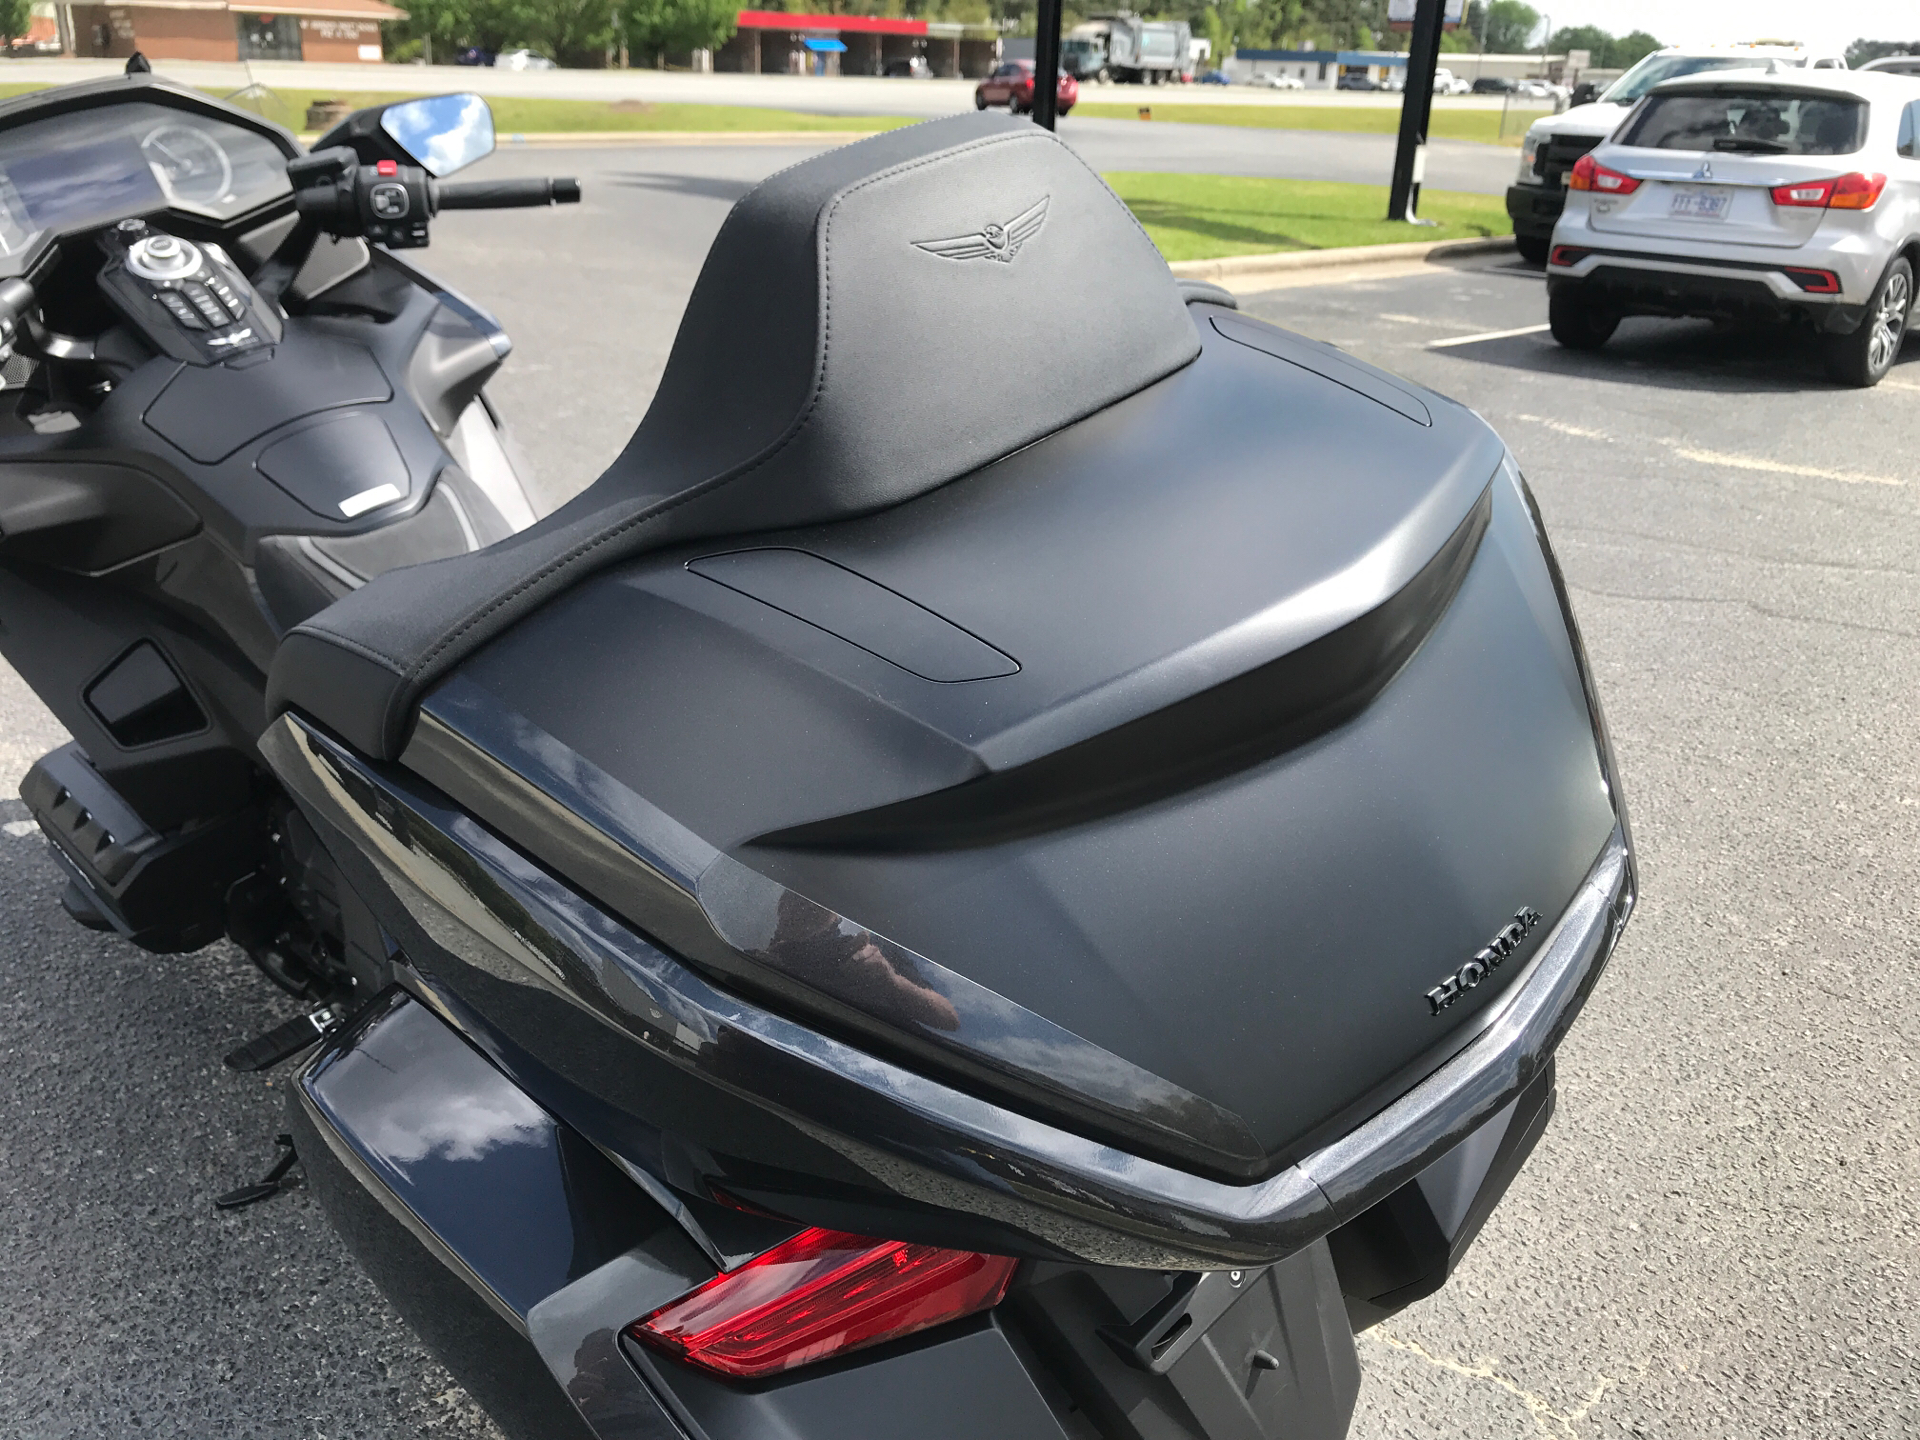 2021 Honda Gold Wing Tour Automatic DCT in Greenville, North Carolina - Photo 14